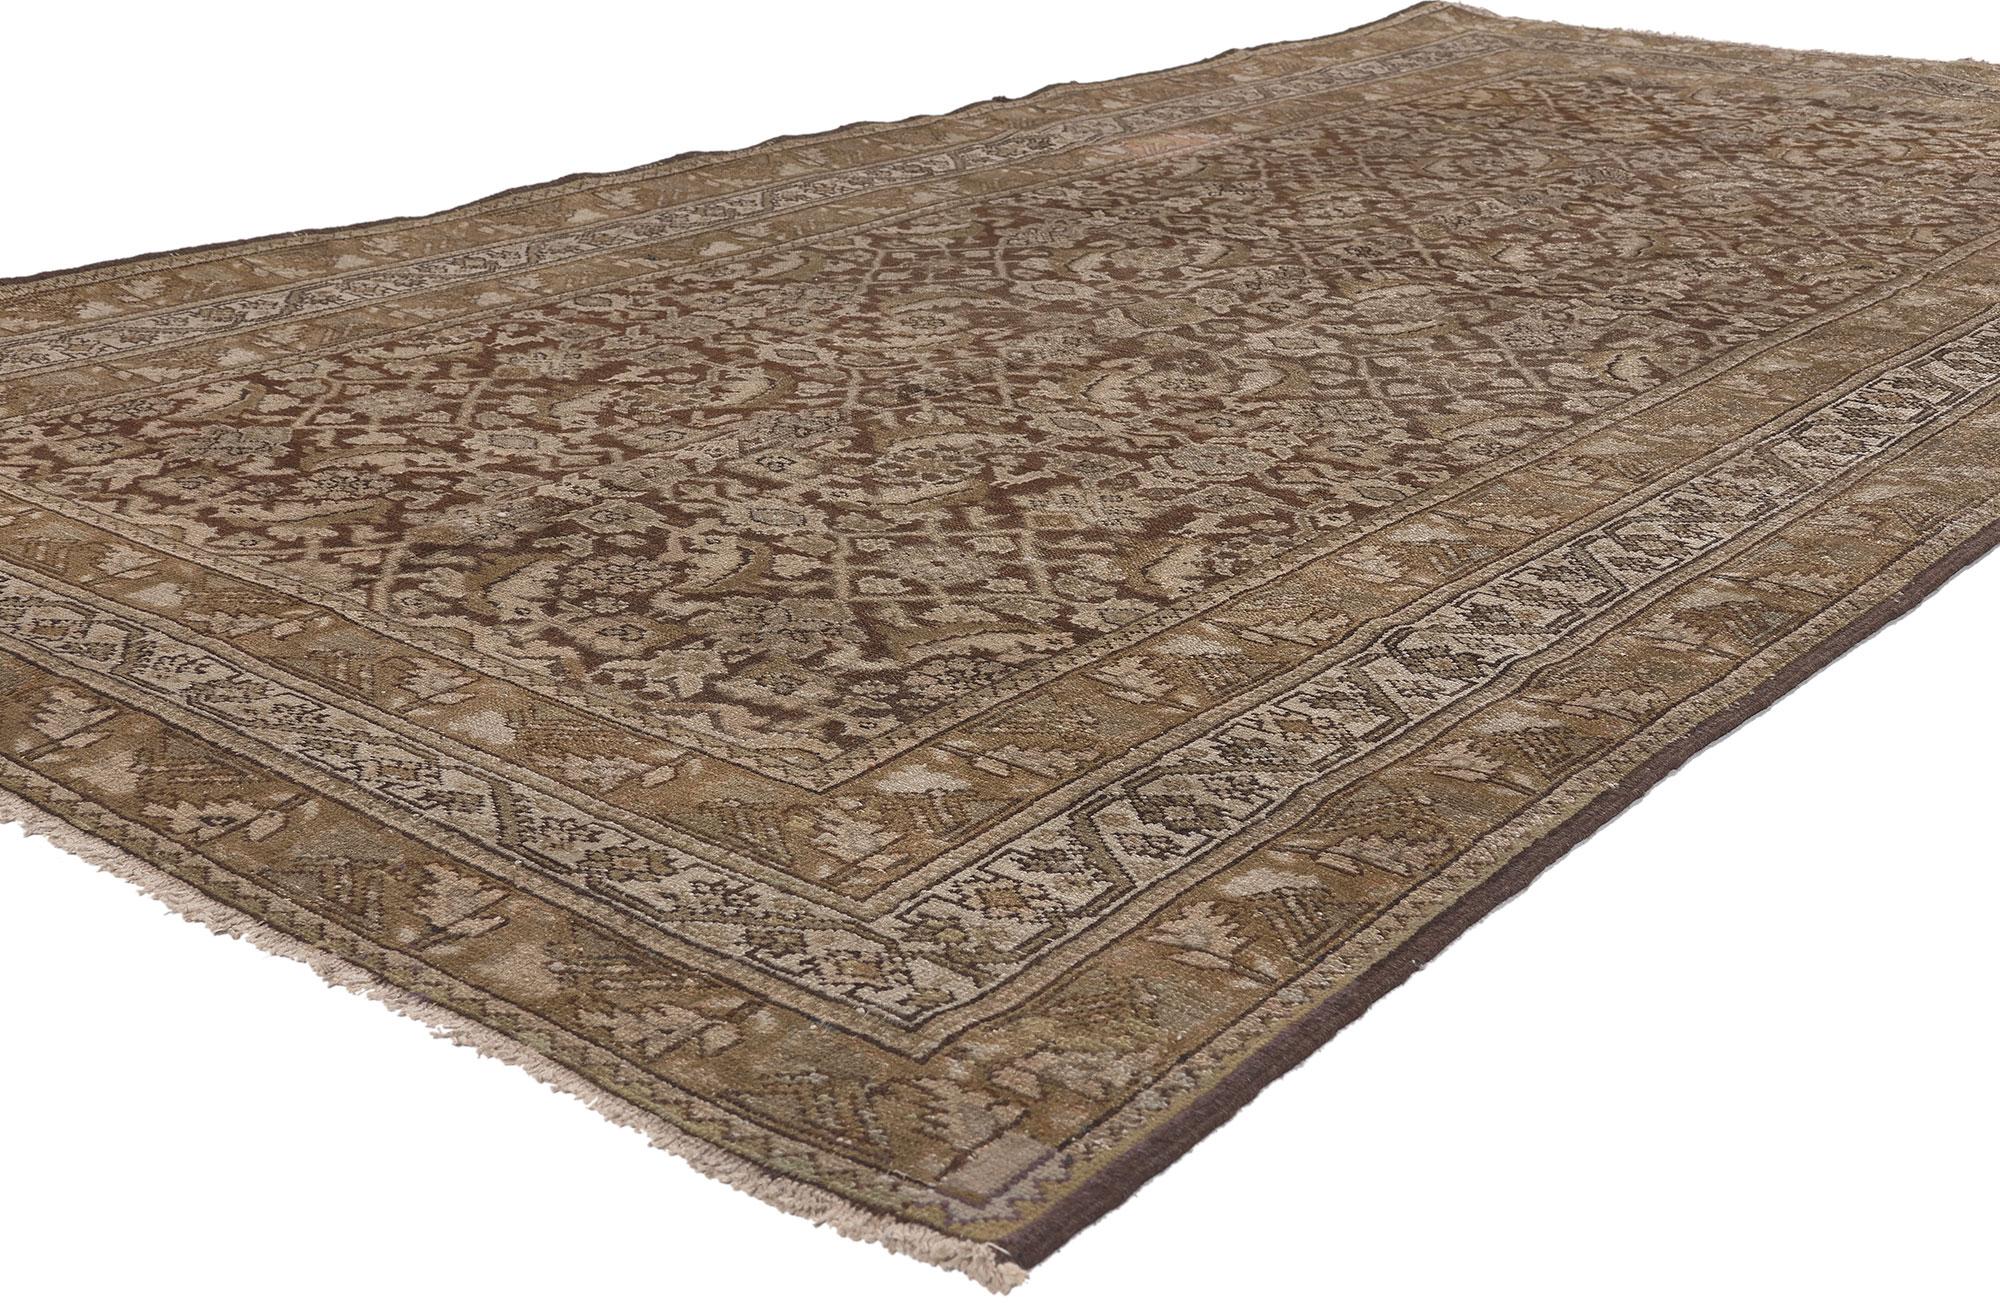 74142 Earth-Tone Antique Persian Malayer Rug, 05'00 x 09'08.
Rich and neutral meets warm and cozy in this antique Persian Malayer rug. The geometric Herati design and neutral colors woven into this piece work together creating a soft and subtle yet